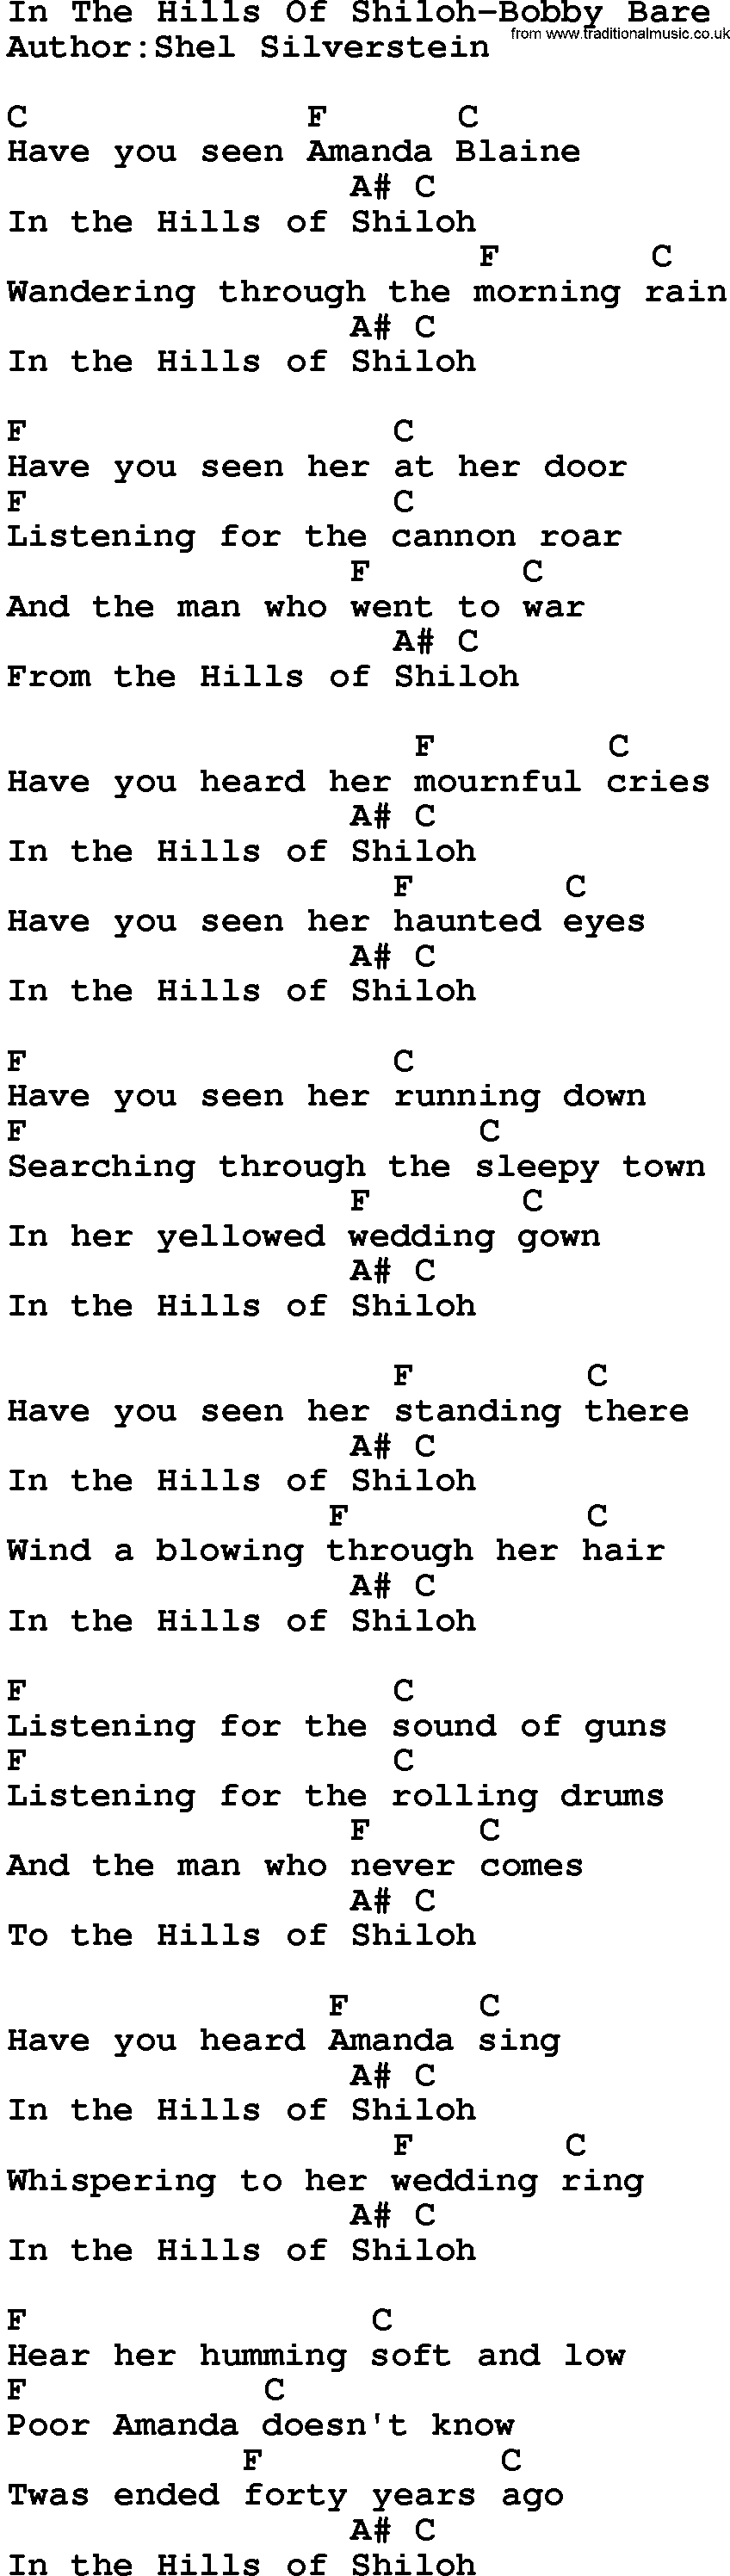 Country music song: In The Hills Of Shiloh-Bobby Bare lyrics and chords